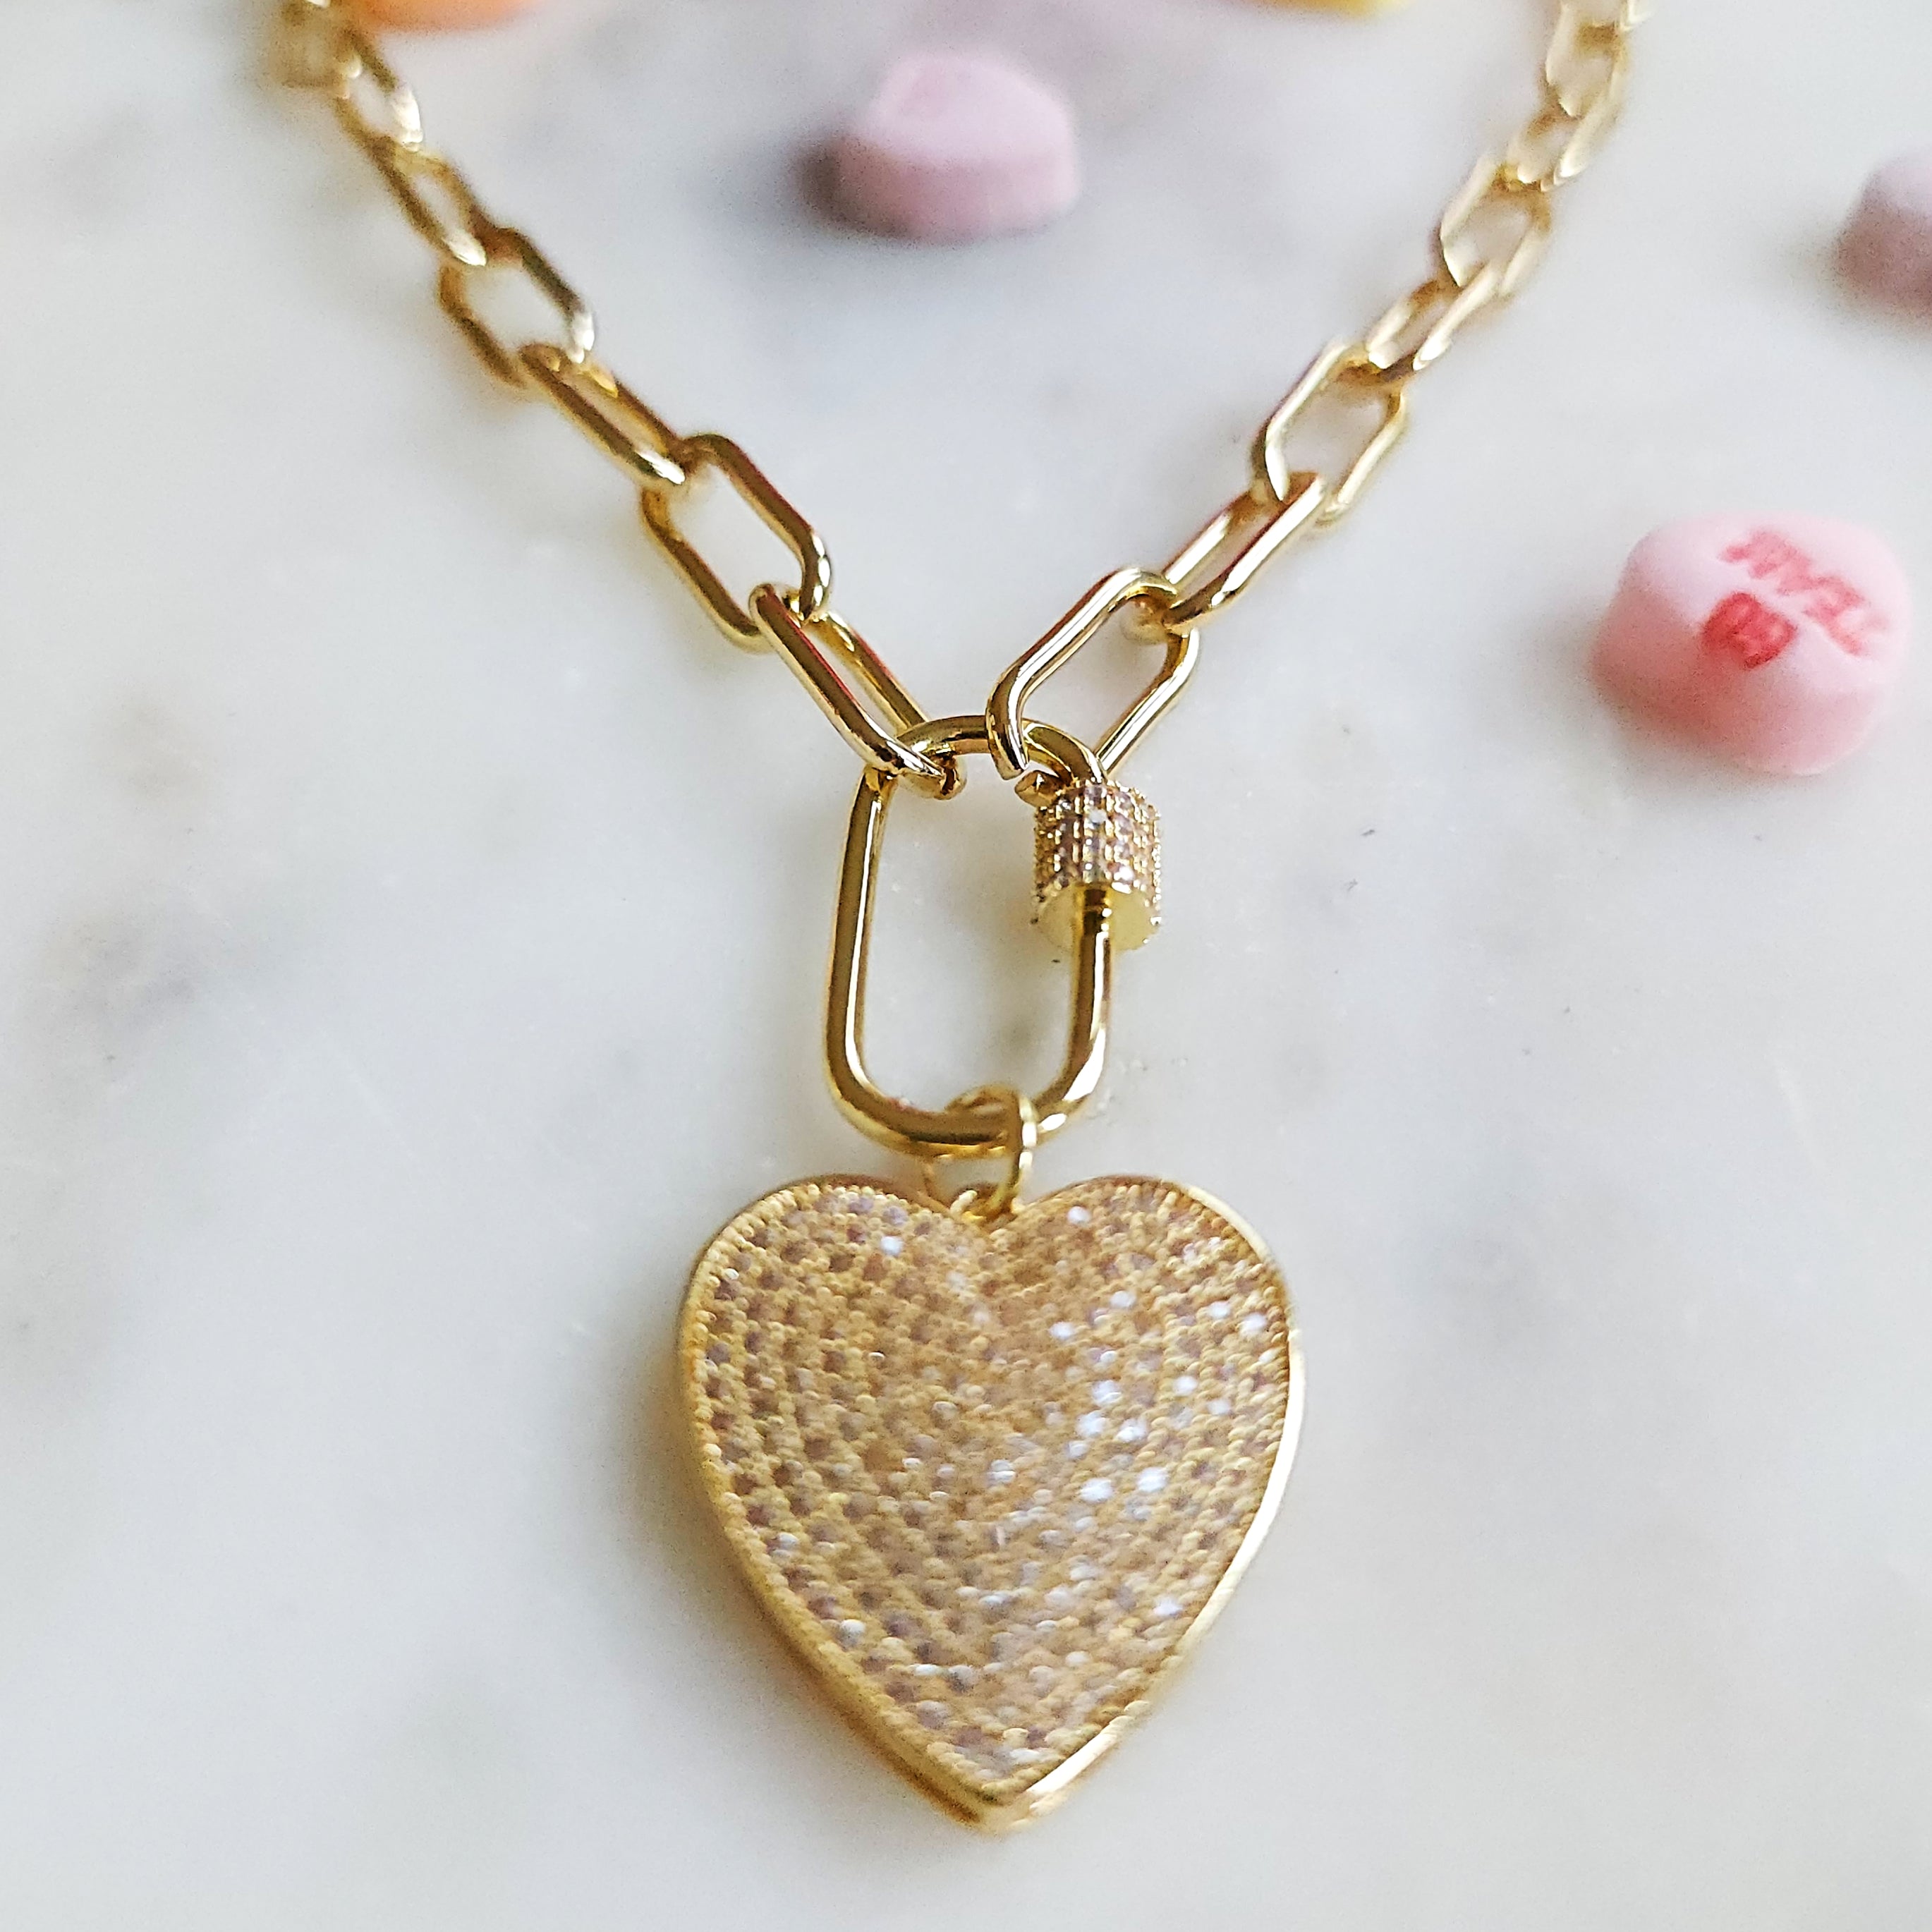 Pure Heart Necklace